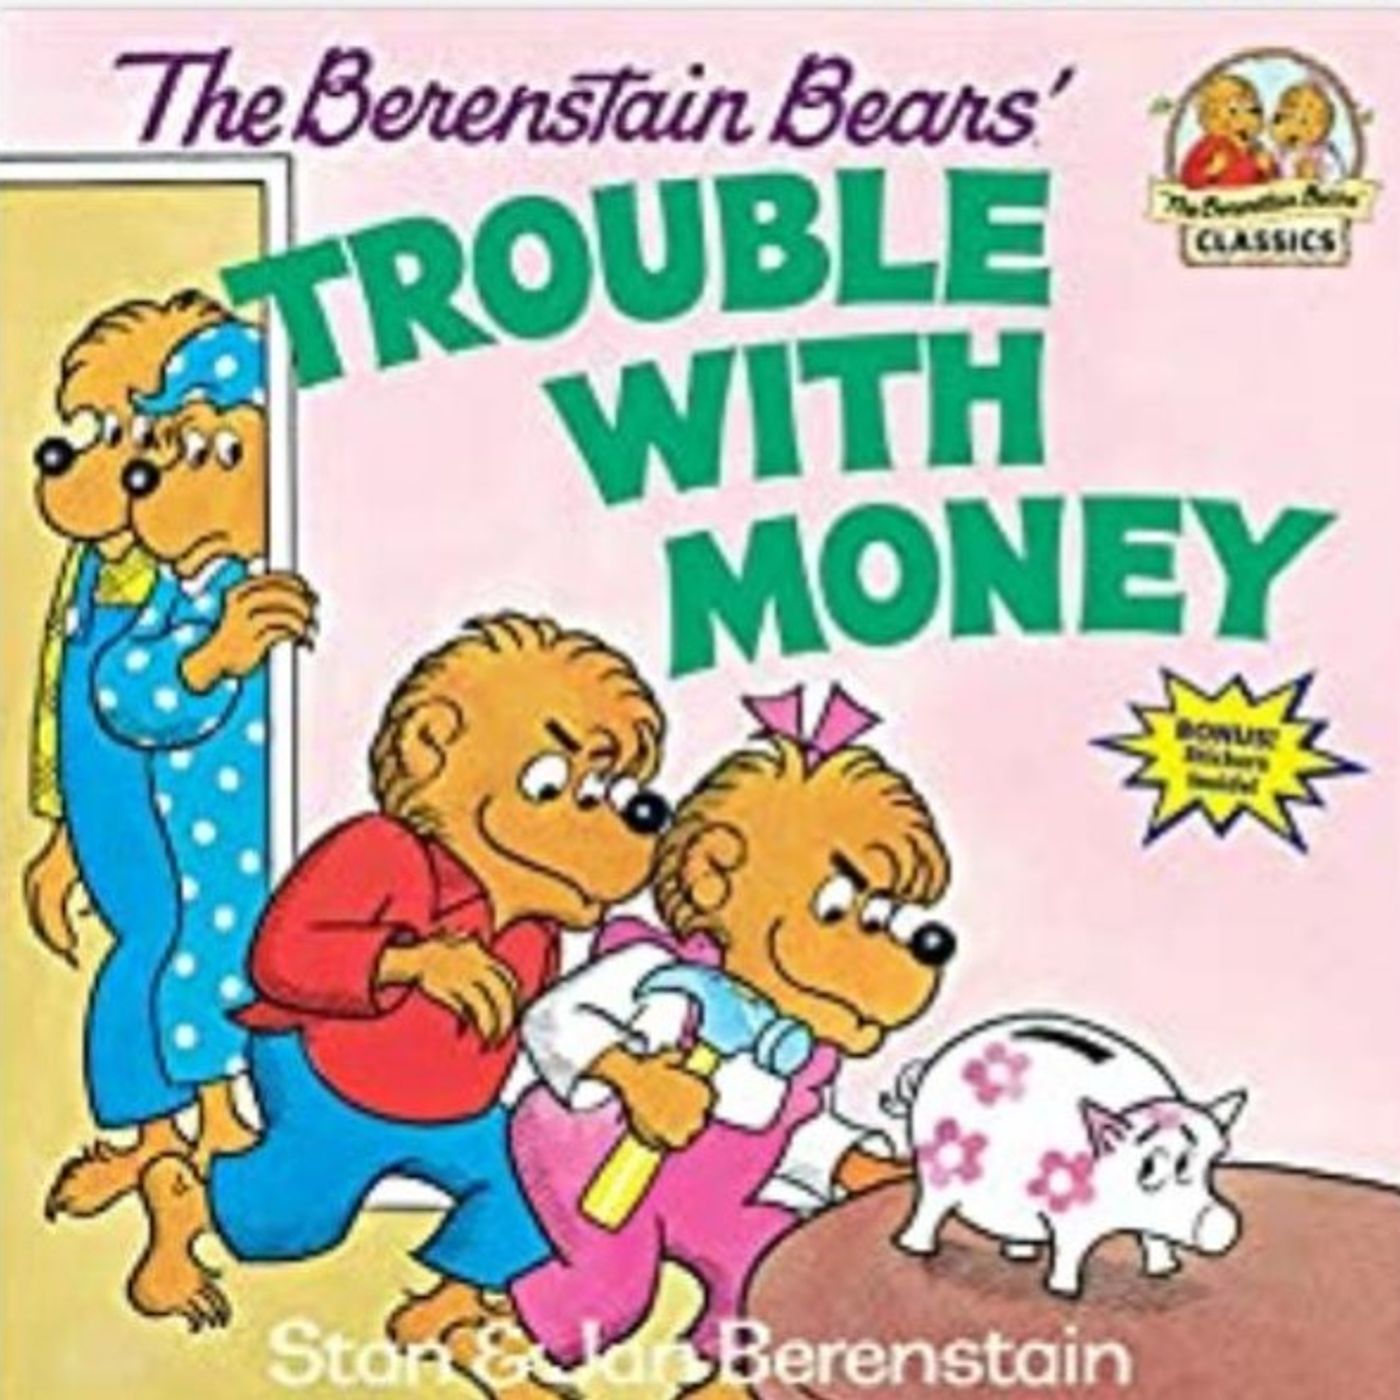 Wealthy Reader's Club- The Berenstain Bears' Trouble With Money